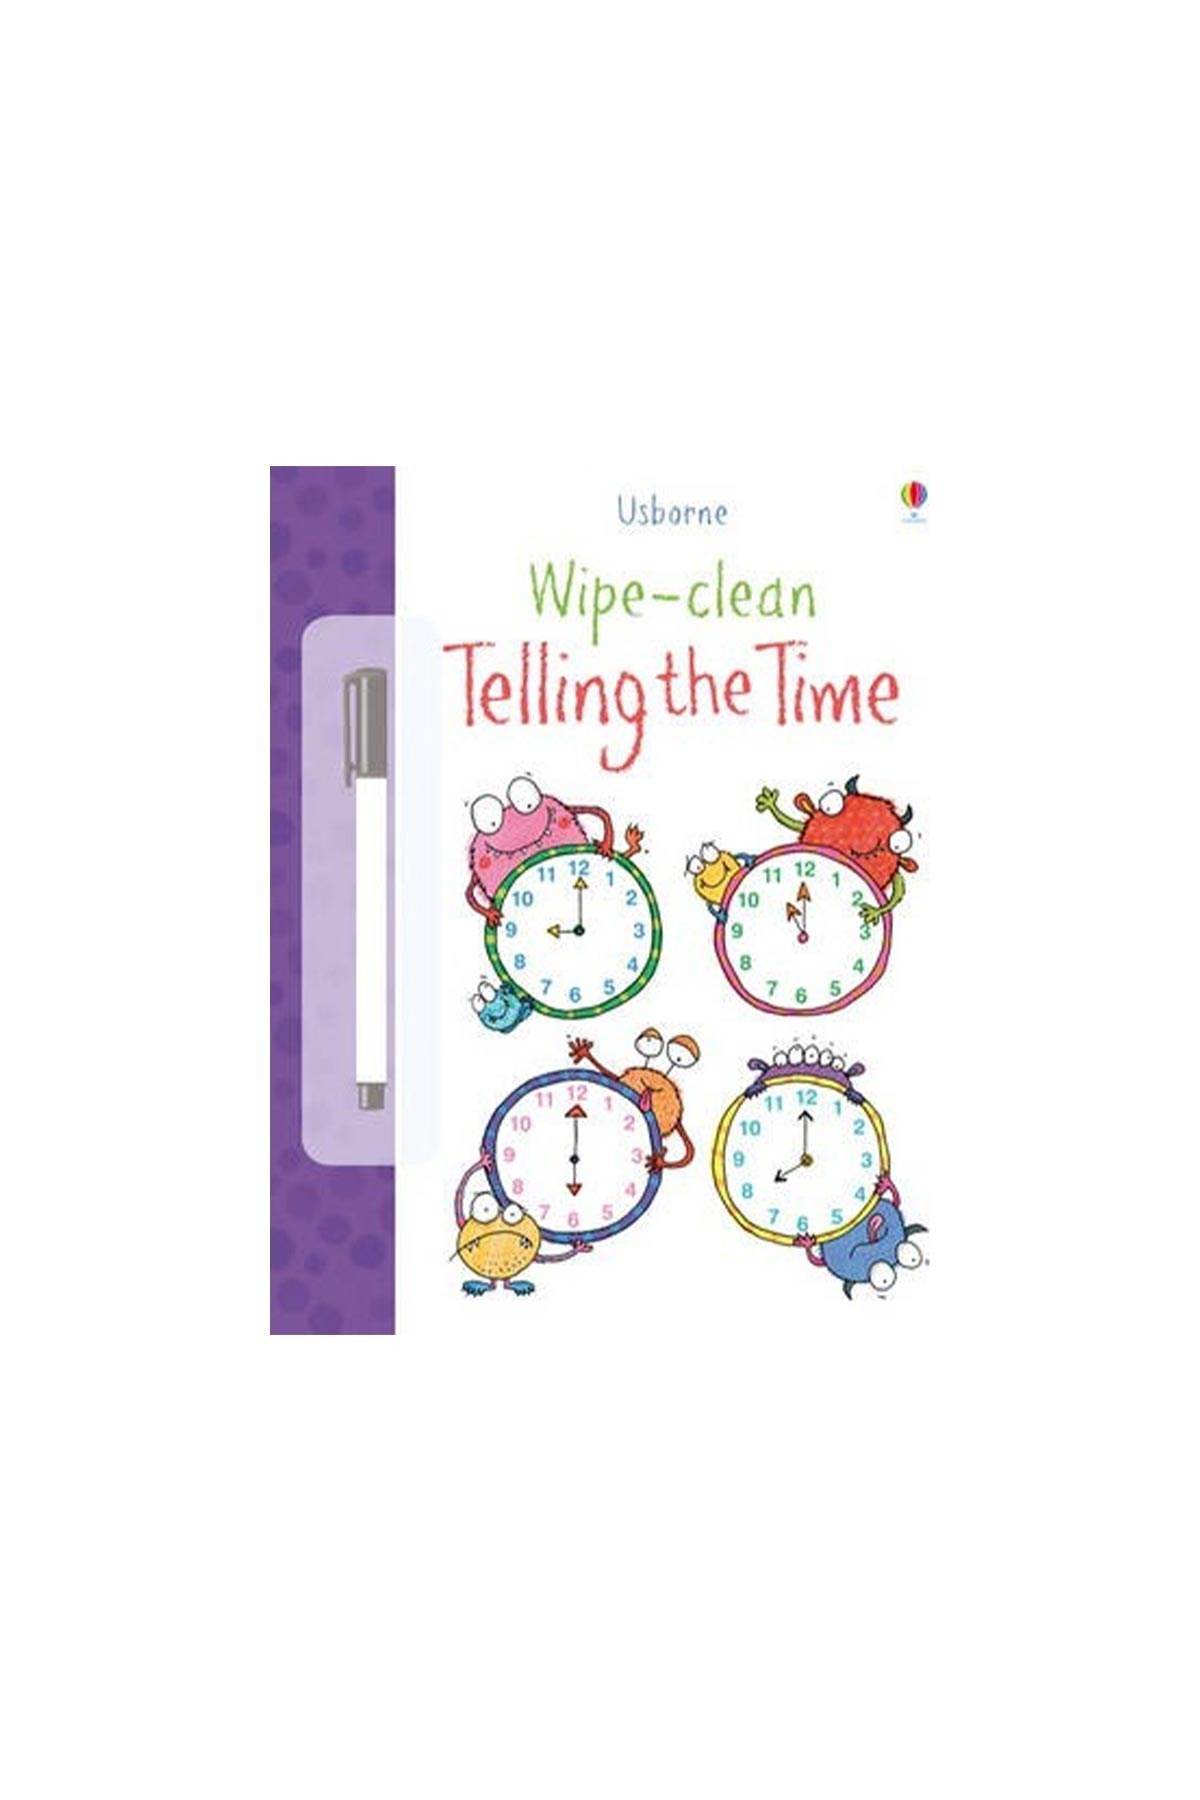 The Usborne Wipe Clean Telling The Time